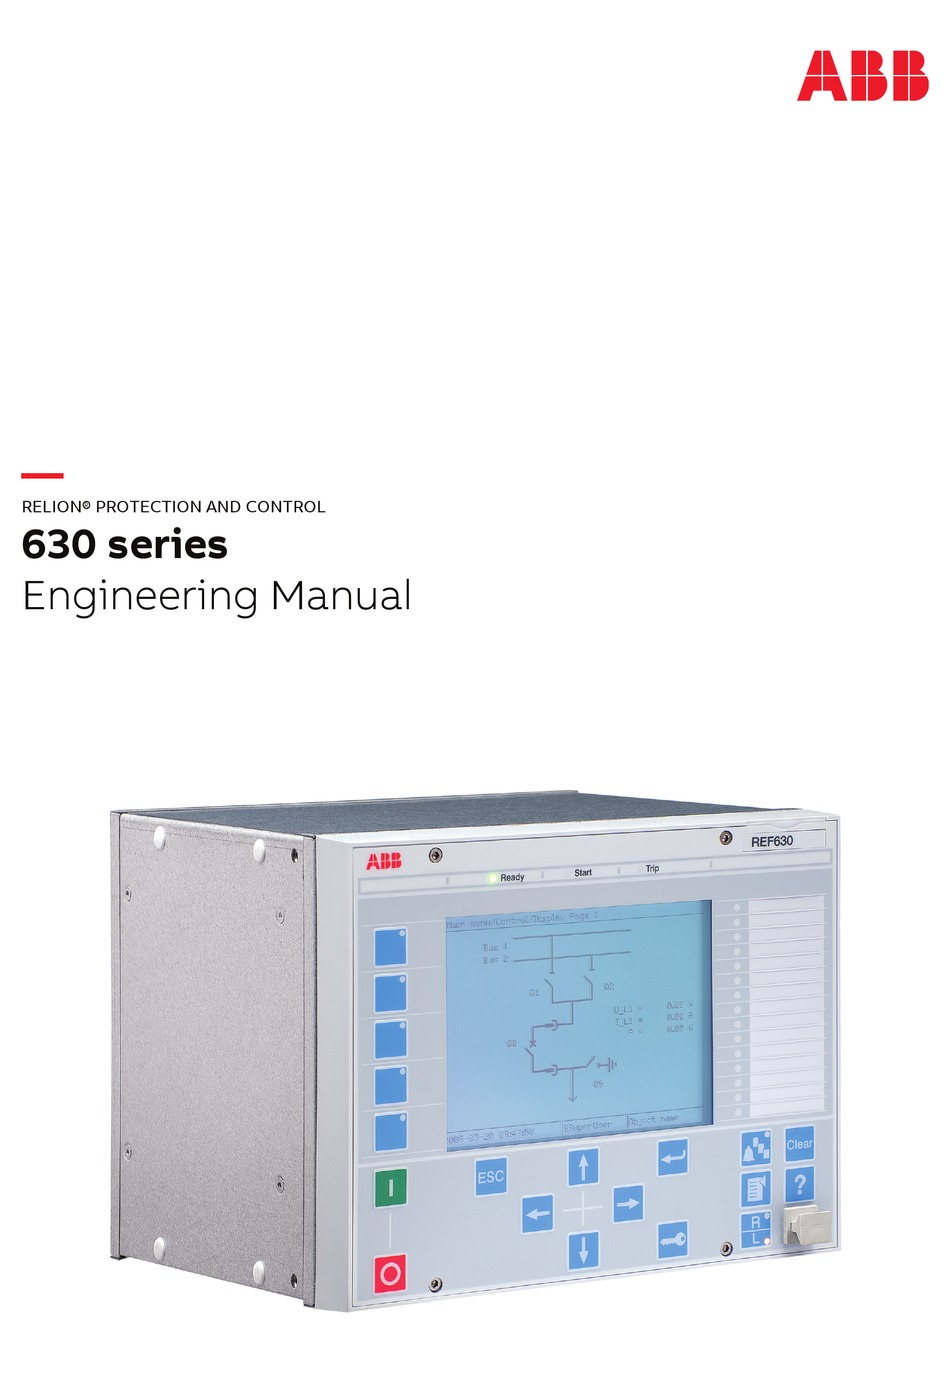 abb pcm600 software free download